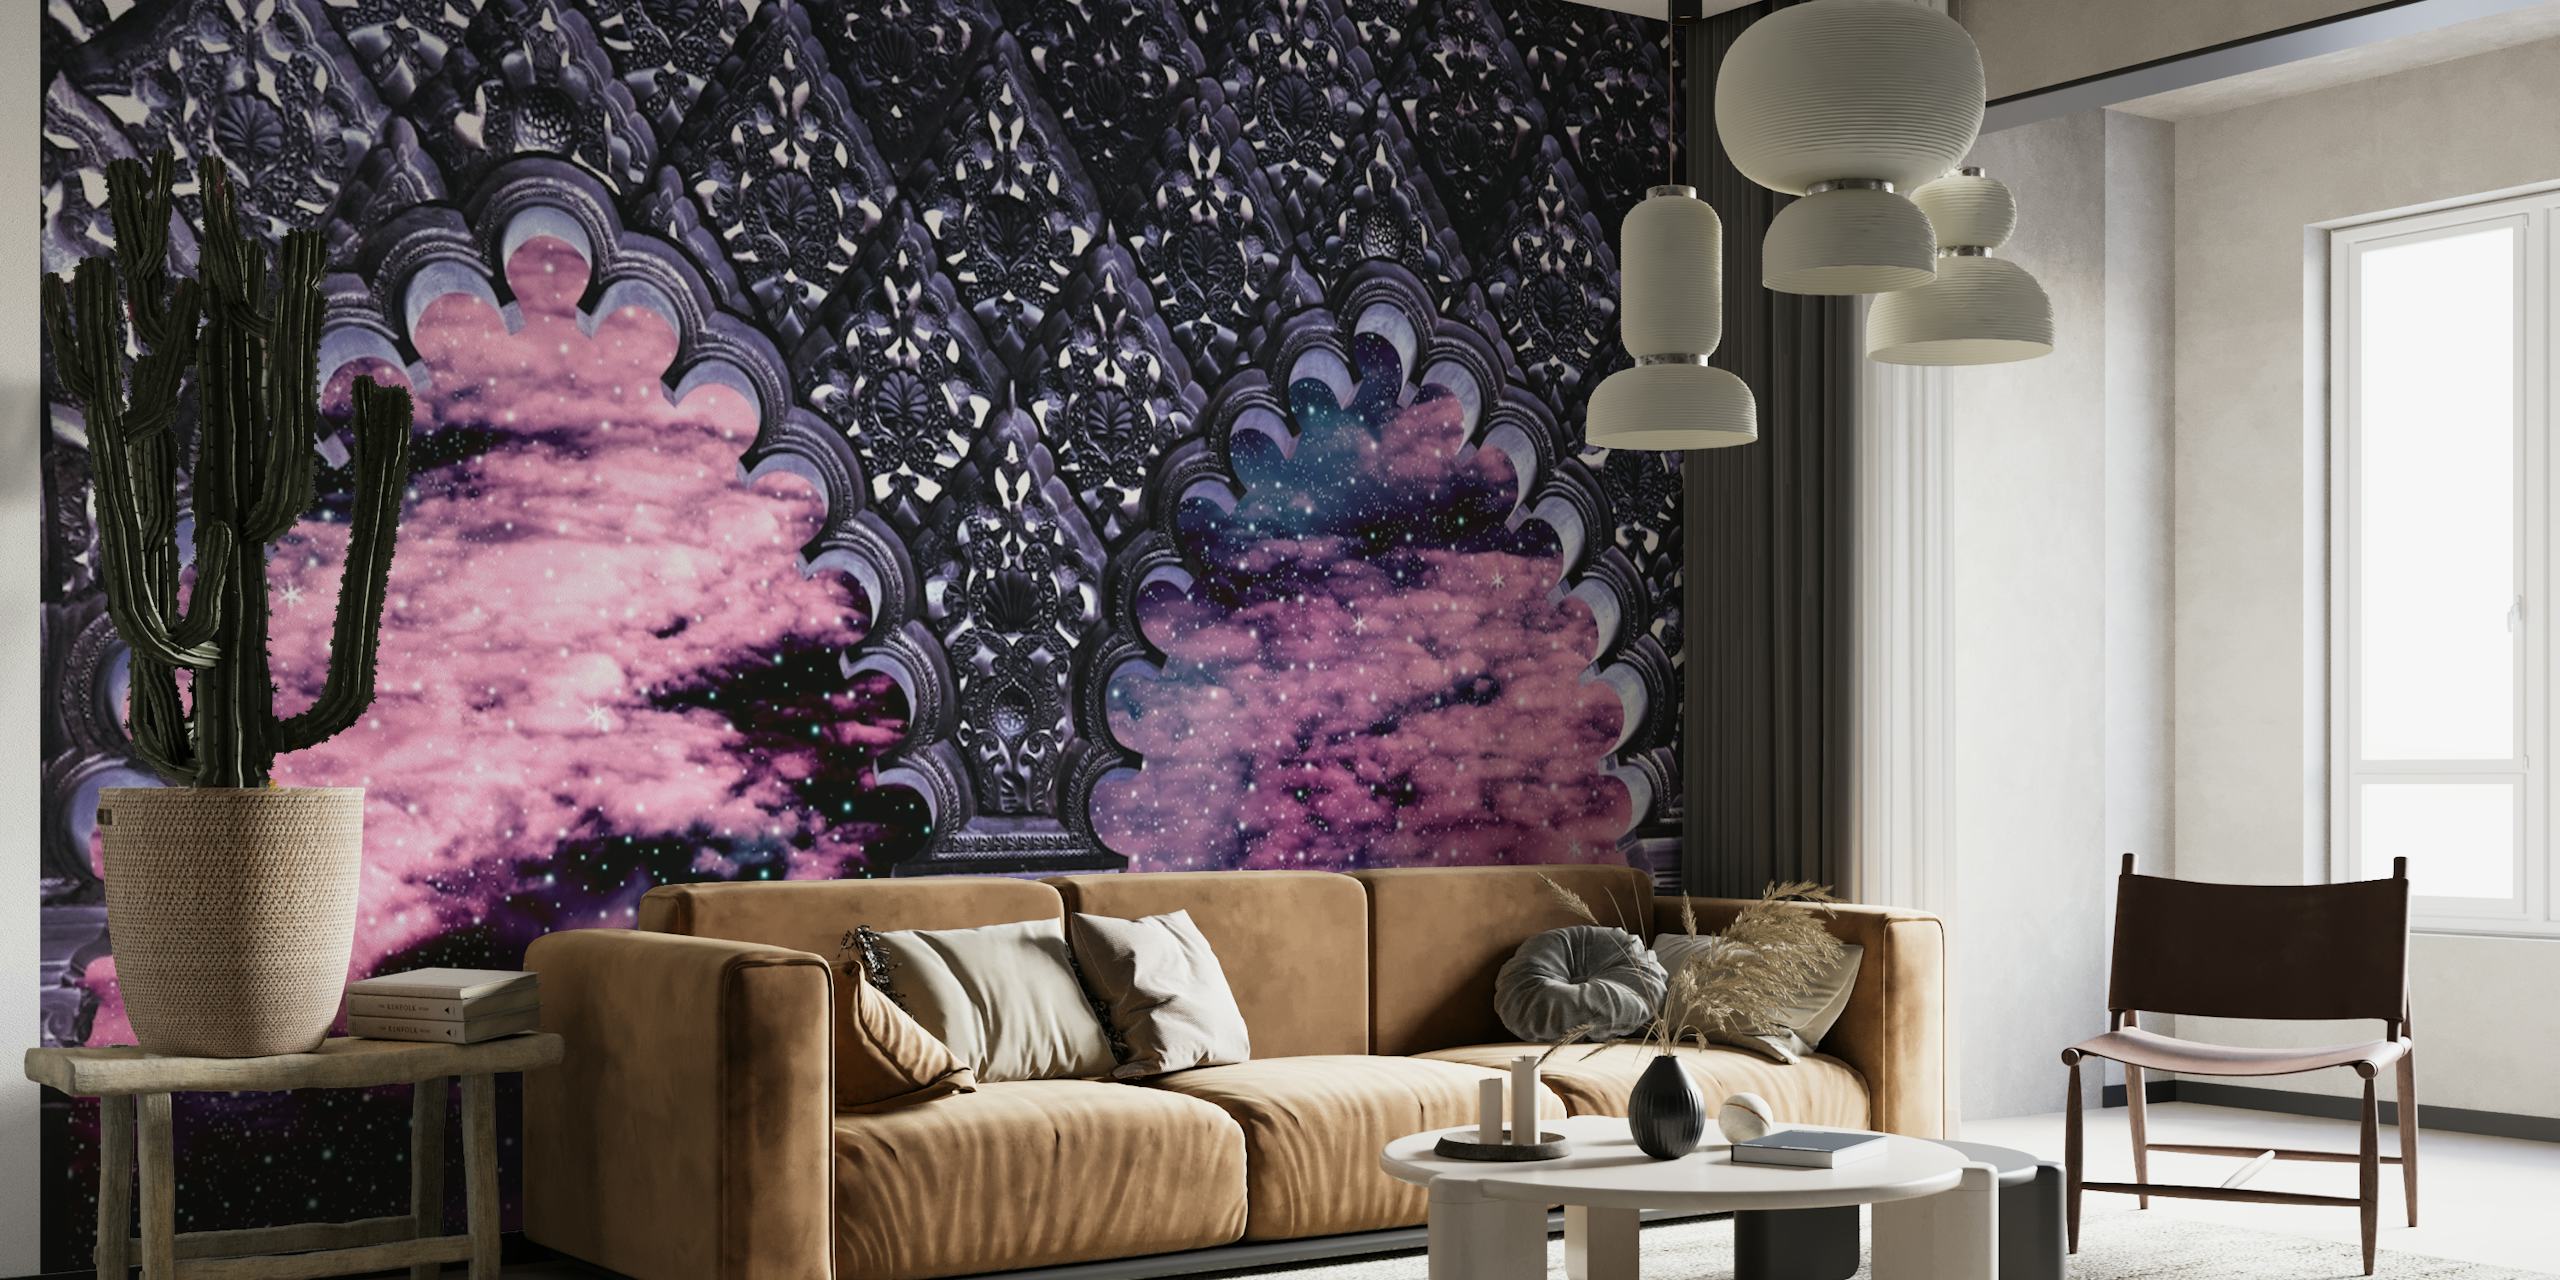 Cosmic nebula wall mural with purple and blue arches resembling a star-filled night sky